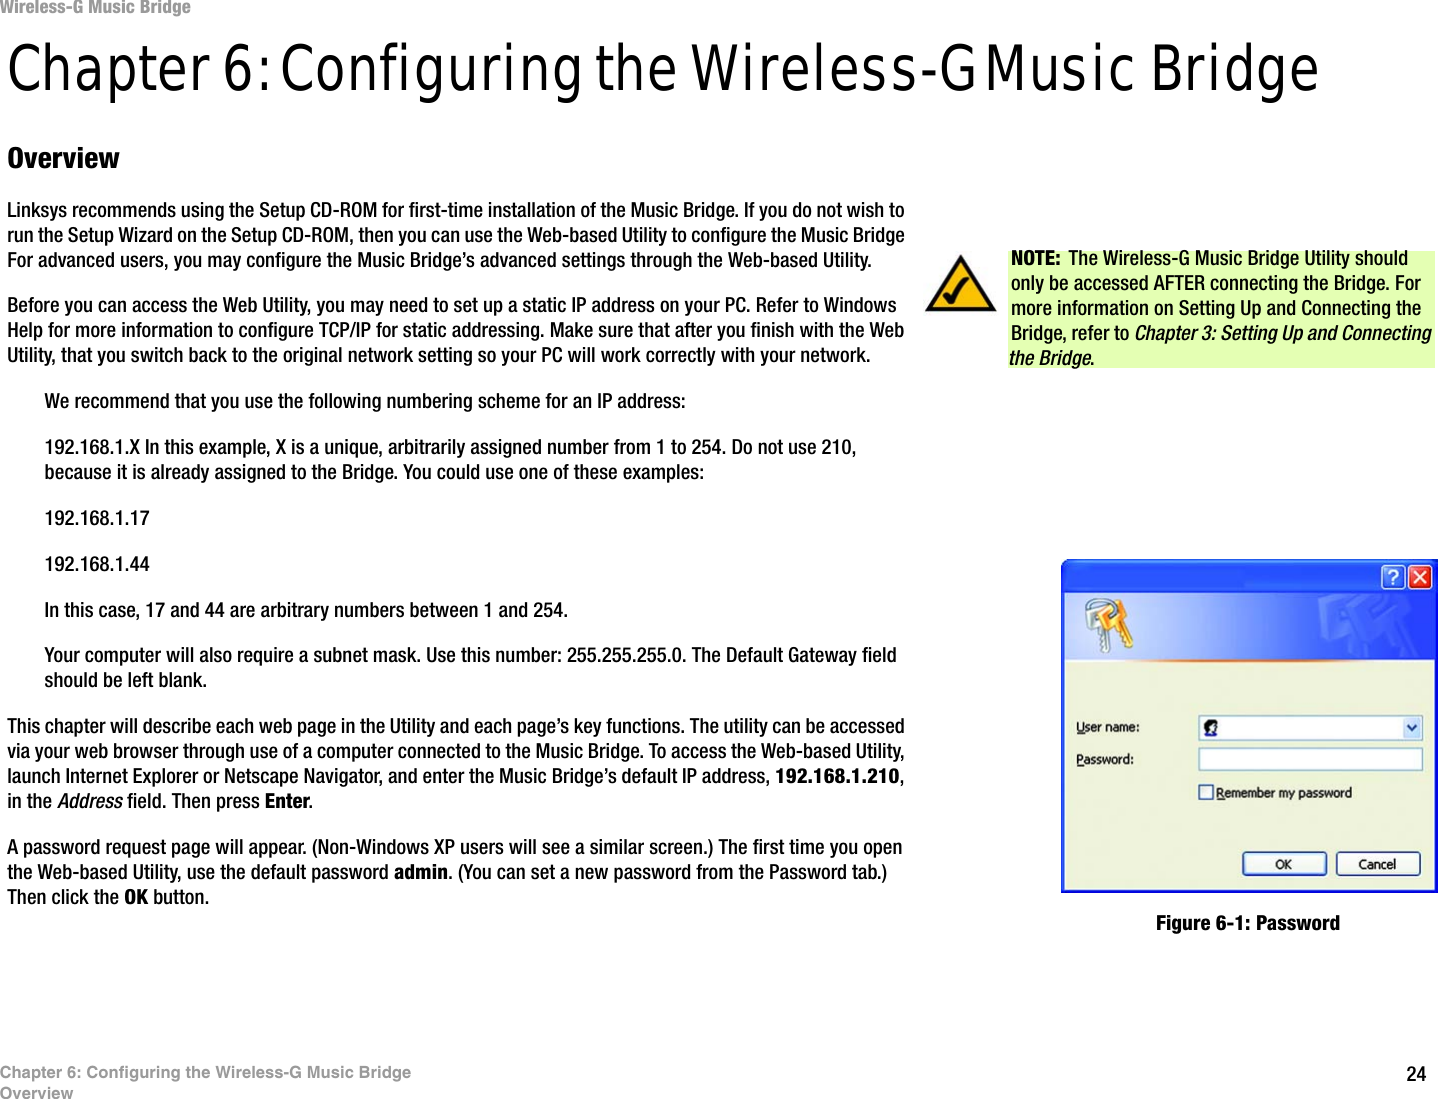 24Chapter 6: Configuring the Wireless-G Music BridgeOverviewWireless-G Music BridgeChapter 6: Configuring the Wireless-G Music Bridge OverviewLinksys recommends using the Setup CD-ROM for first-time installation of the Music Bridge. If you do not wish to run the Setup Wizard on the Setup CD-ROM, then you can use the Web-based Utility to configure the Music Bridge For advanced users, you may configure the Music Bridge’s advanced settings through the Web-based Utility.Before you can access the Web Utility, you may need to set up a static IP address on your PC. Refer to Windows Help for more information to configure TCP/IP for static addressing. Make sure that after you finish with the Web Utility, that you switch back to the original network setting so your PC will work correctly with your network.We recommend that you use the following numbering scheme for an IP address: 192.168.1.X In this example, X is a unique, arbitrarily assigned number from 1 to 254. Do not use 210, because it is already assigned to the Bridge. You could use one of these examples: 192.168.1.17192.168.1.44In this case, 17 and 44 are arbitrary numbers between 1 and 254. Your computer will also require a subnet mask. Use this number: 255.255.255.0. The Default Gateway field should be left blank.This chapter will describe each web page in the Utility and each page’s key functions. The utility can be accessed via your web browser through use of a computer connected to the Music Bridge. To access the Web-based Utility, launch Internet Explorer or Netscape Navigator, and enter the Music Bridge’s default IP address, 192.168.1.210, in the Address field. Then press Enter. A password request page will appear. (Non-Windows XP users will see a similar screen.) The first time you open the Web-based Utility, use the default password admin. (You can set a new password from the Password tab.) Then click the OK button.  NOTE: The Wireless-G Music Bridge Utility should only be accessed AFTER connecting the Bridge. For more information on Setting Up and Connecting the Bridge, refer to Chapter 3: Setting Up and Connecting the Bridge.Figure 6-1: Password